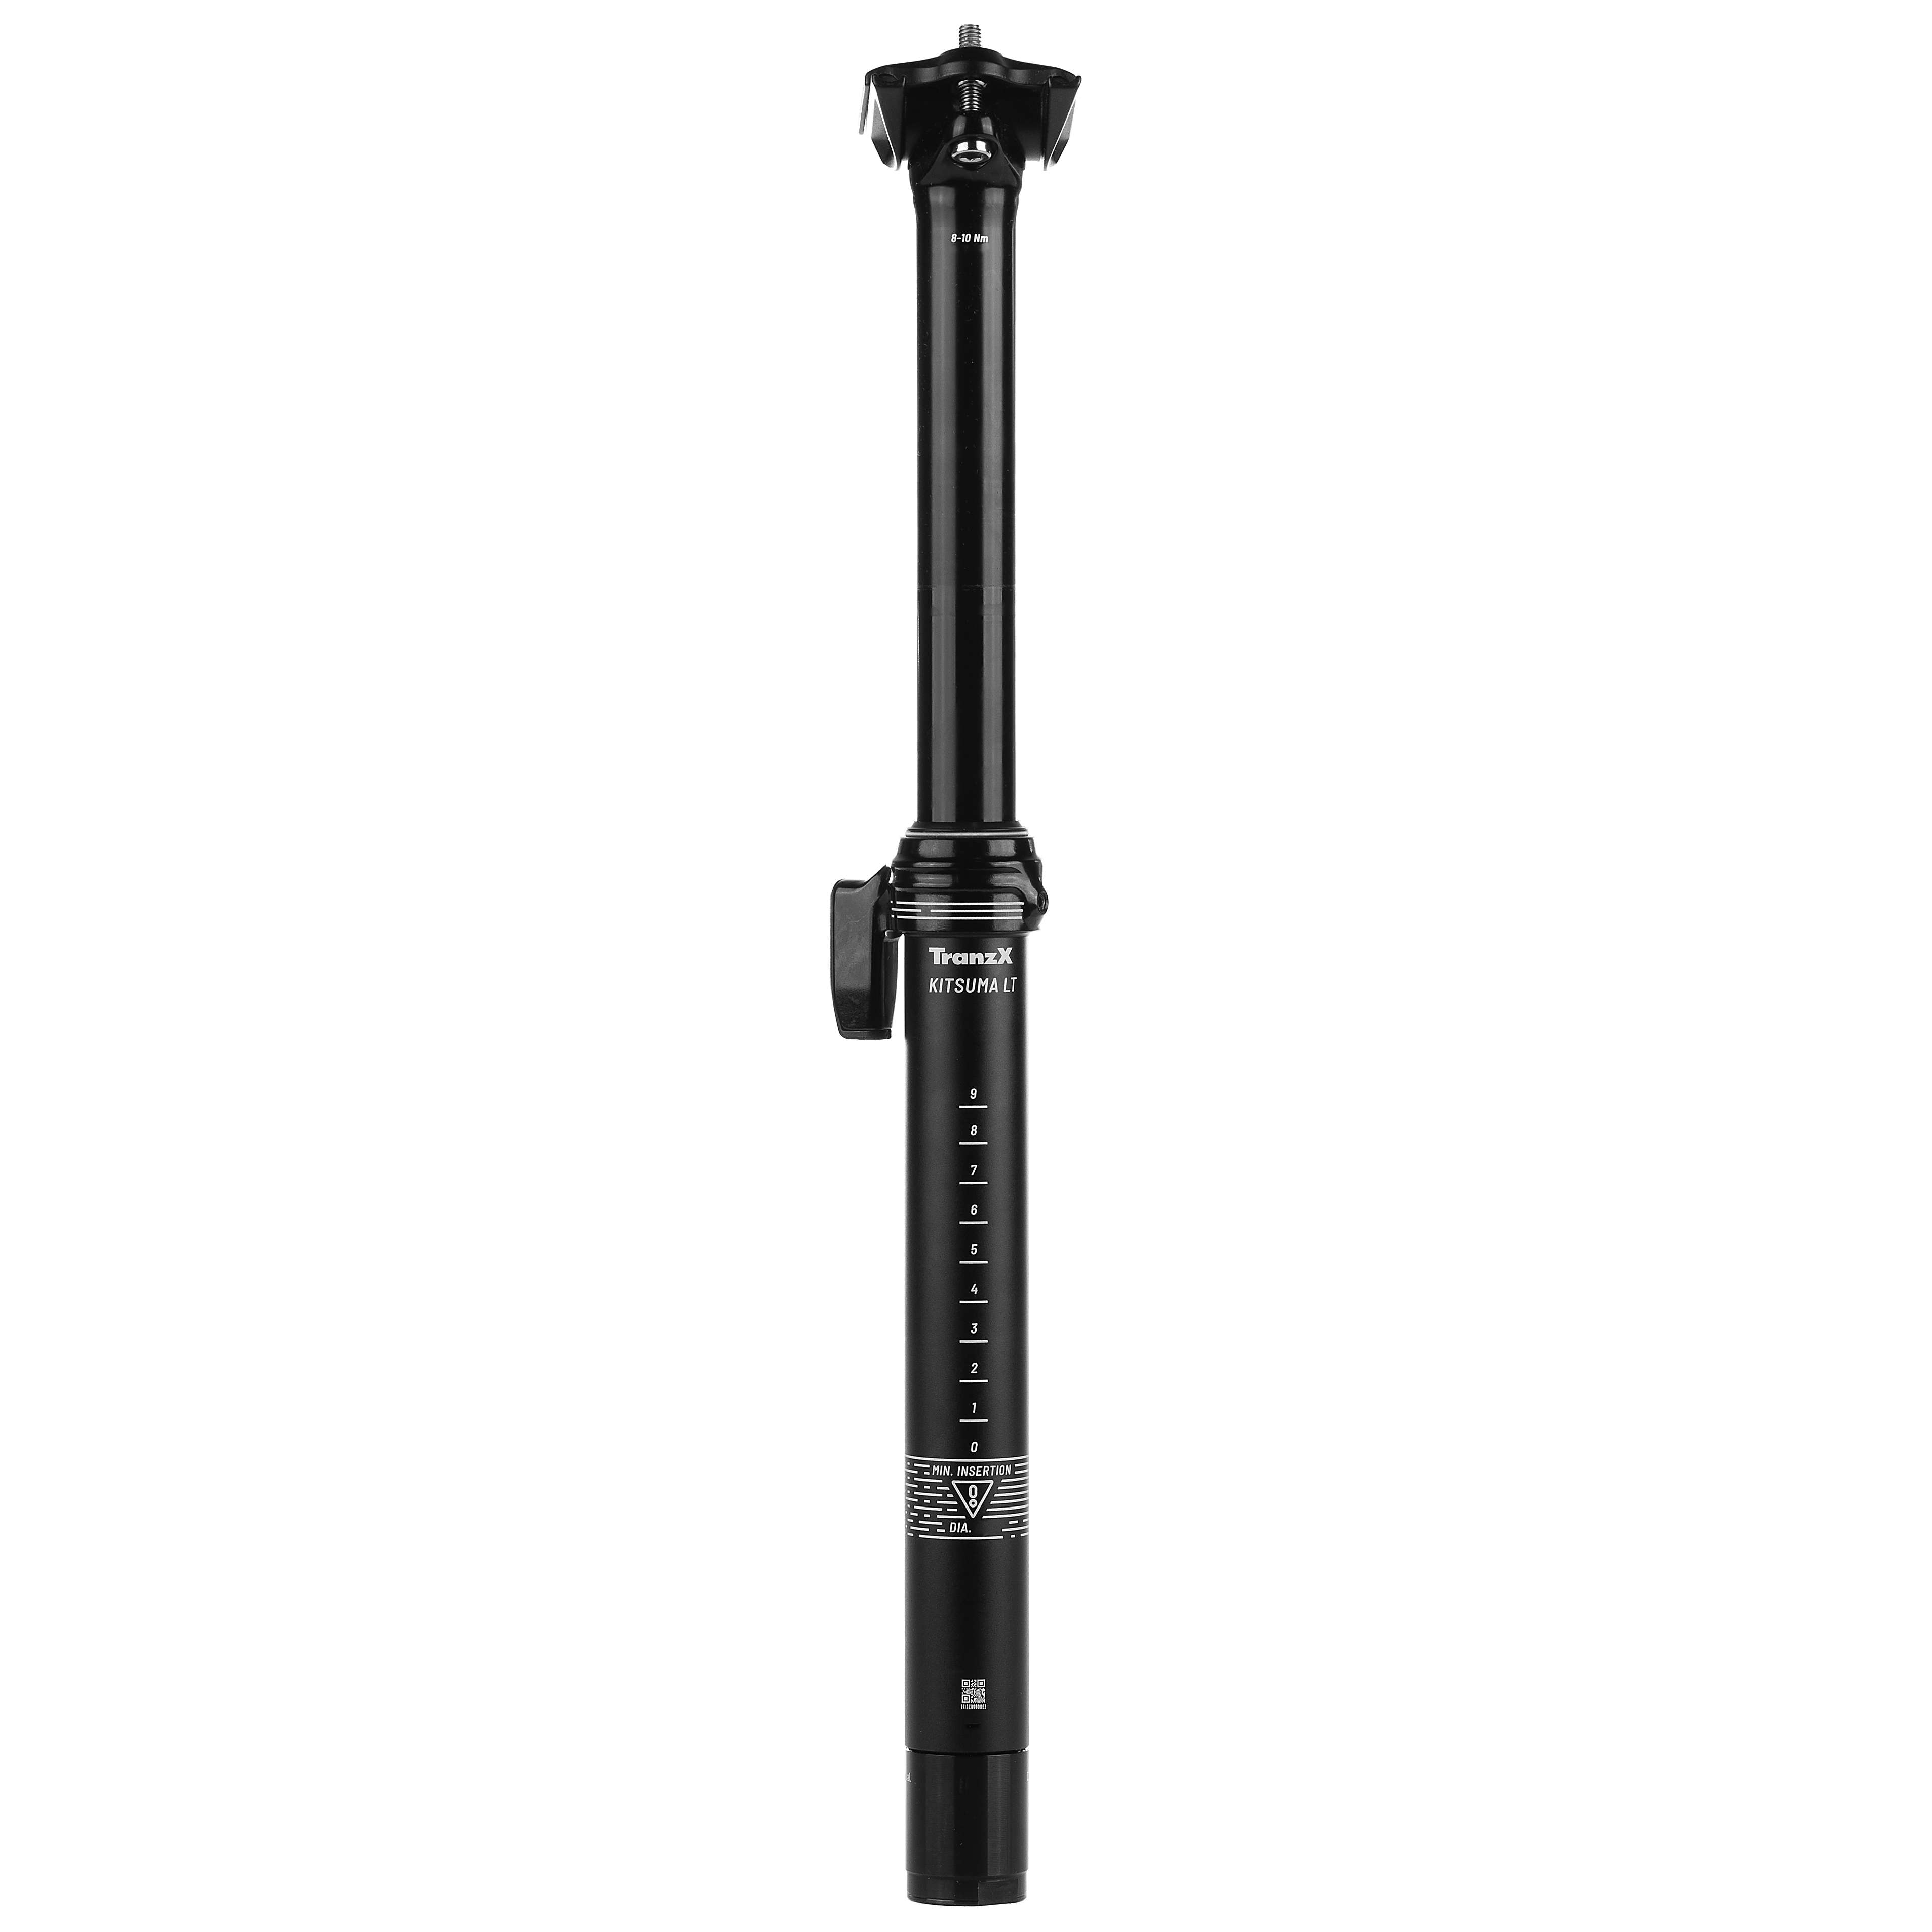 TranzX Bicycle Dropper Posts: Dropper Seatposts For Mountain Bikes 